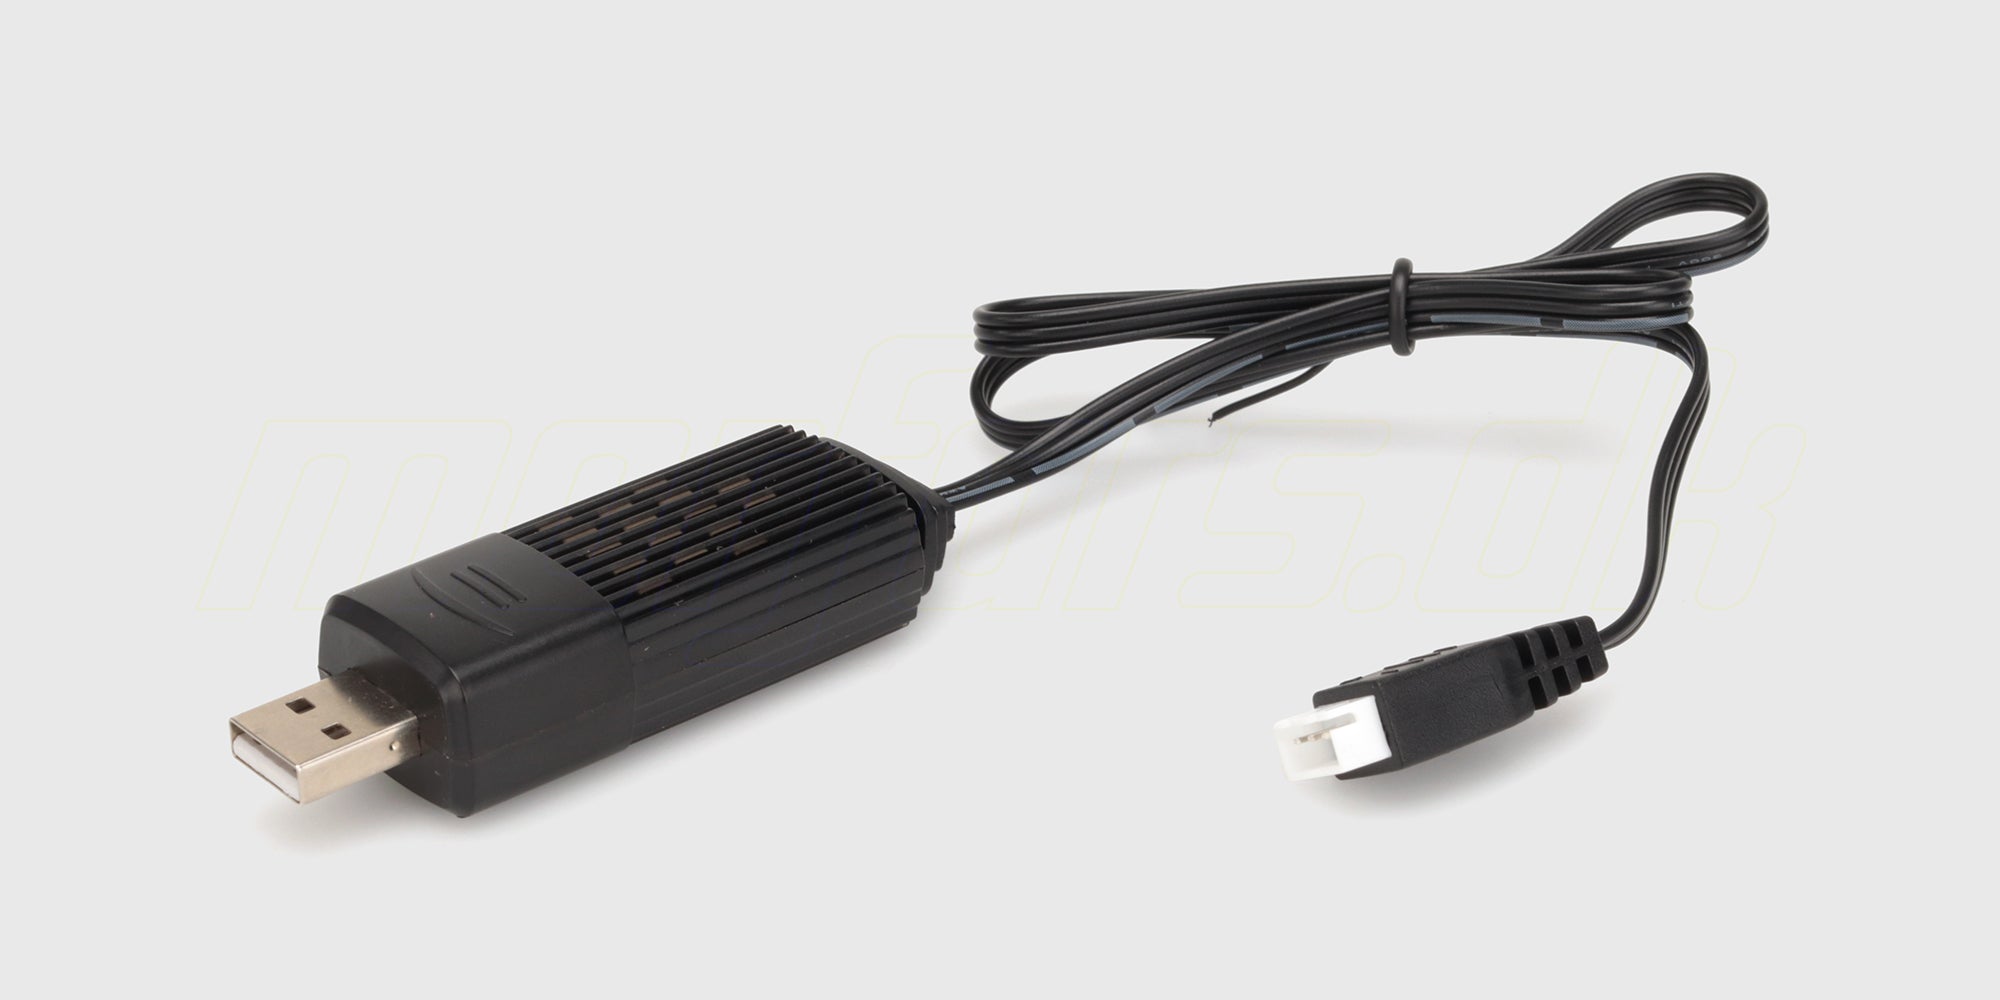 HyperGo USB charging cable for 2S lipo